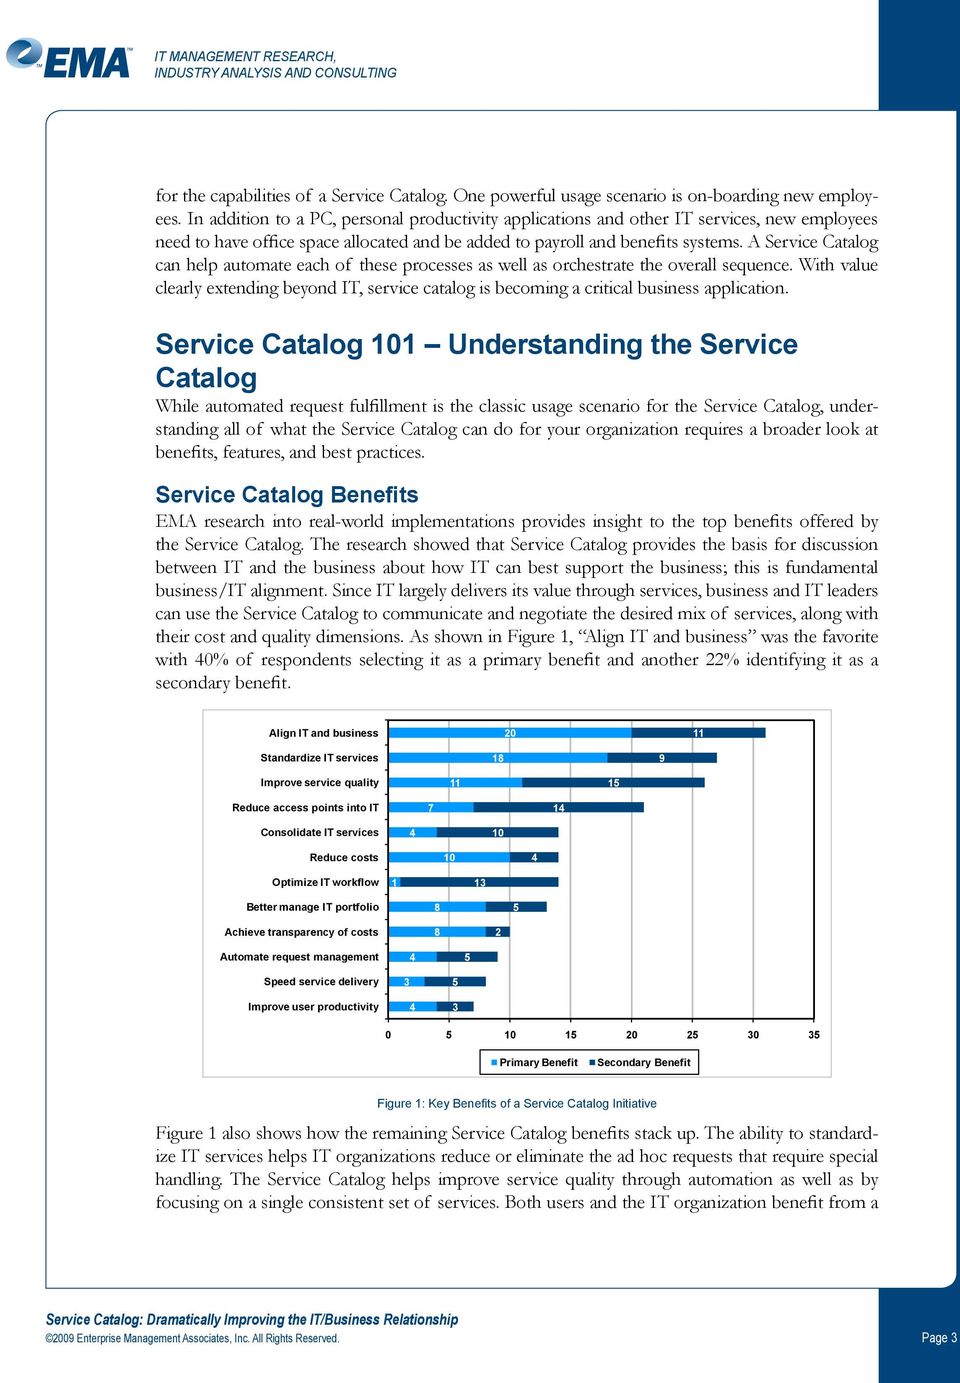 A Service Catalog can help automate each of these processes as well as orchestrate the overall sequence.